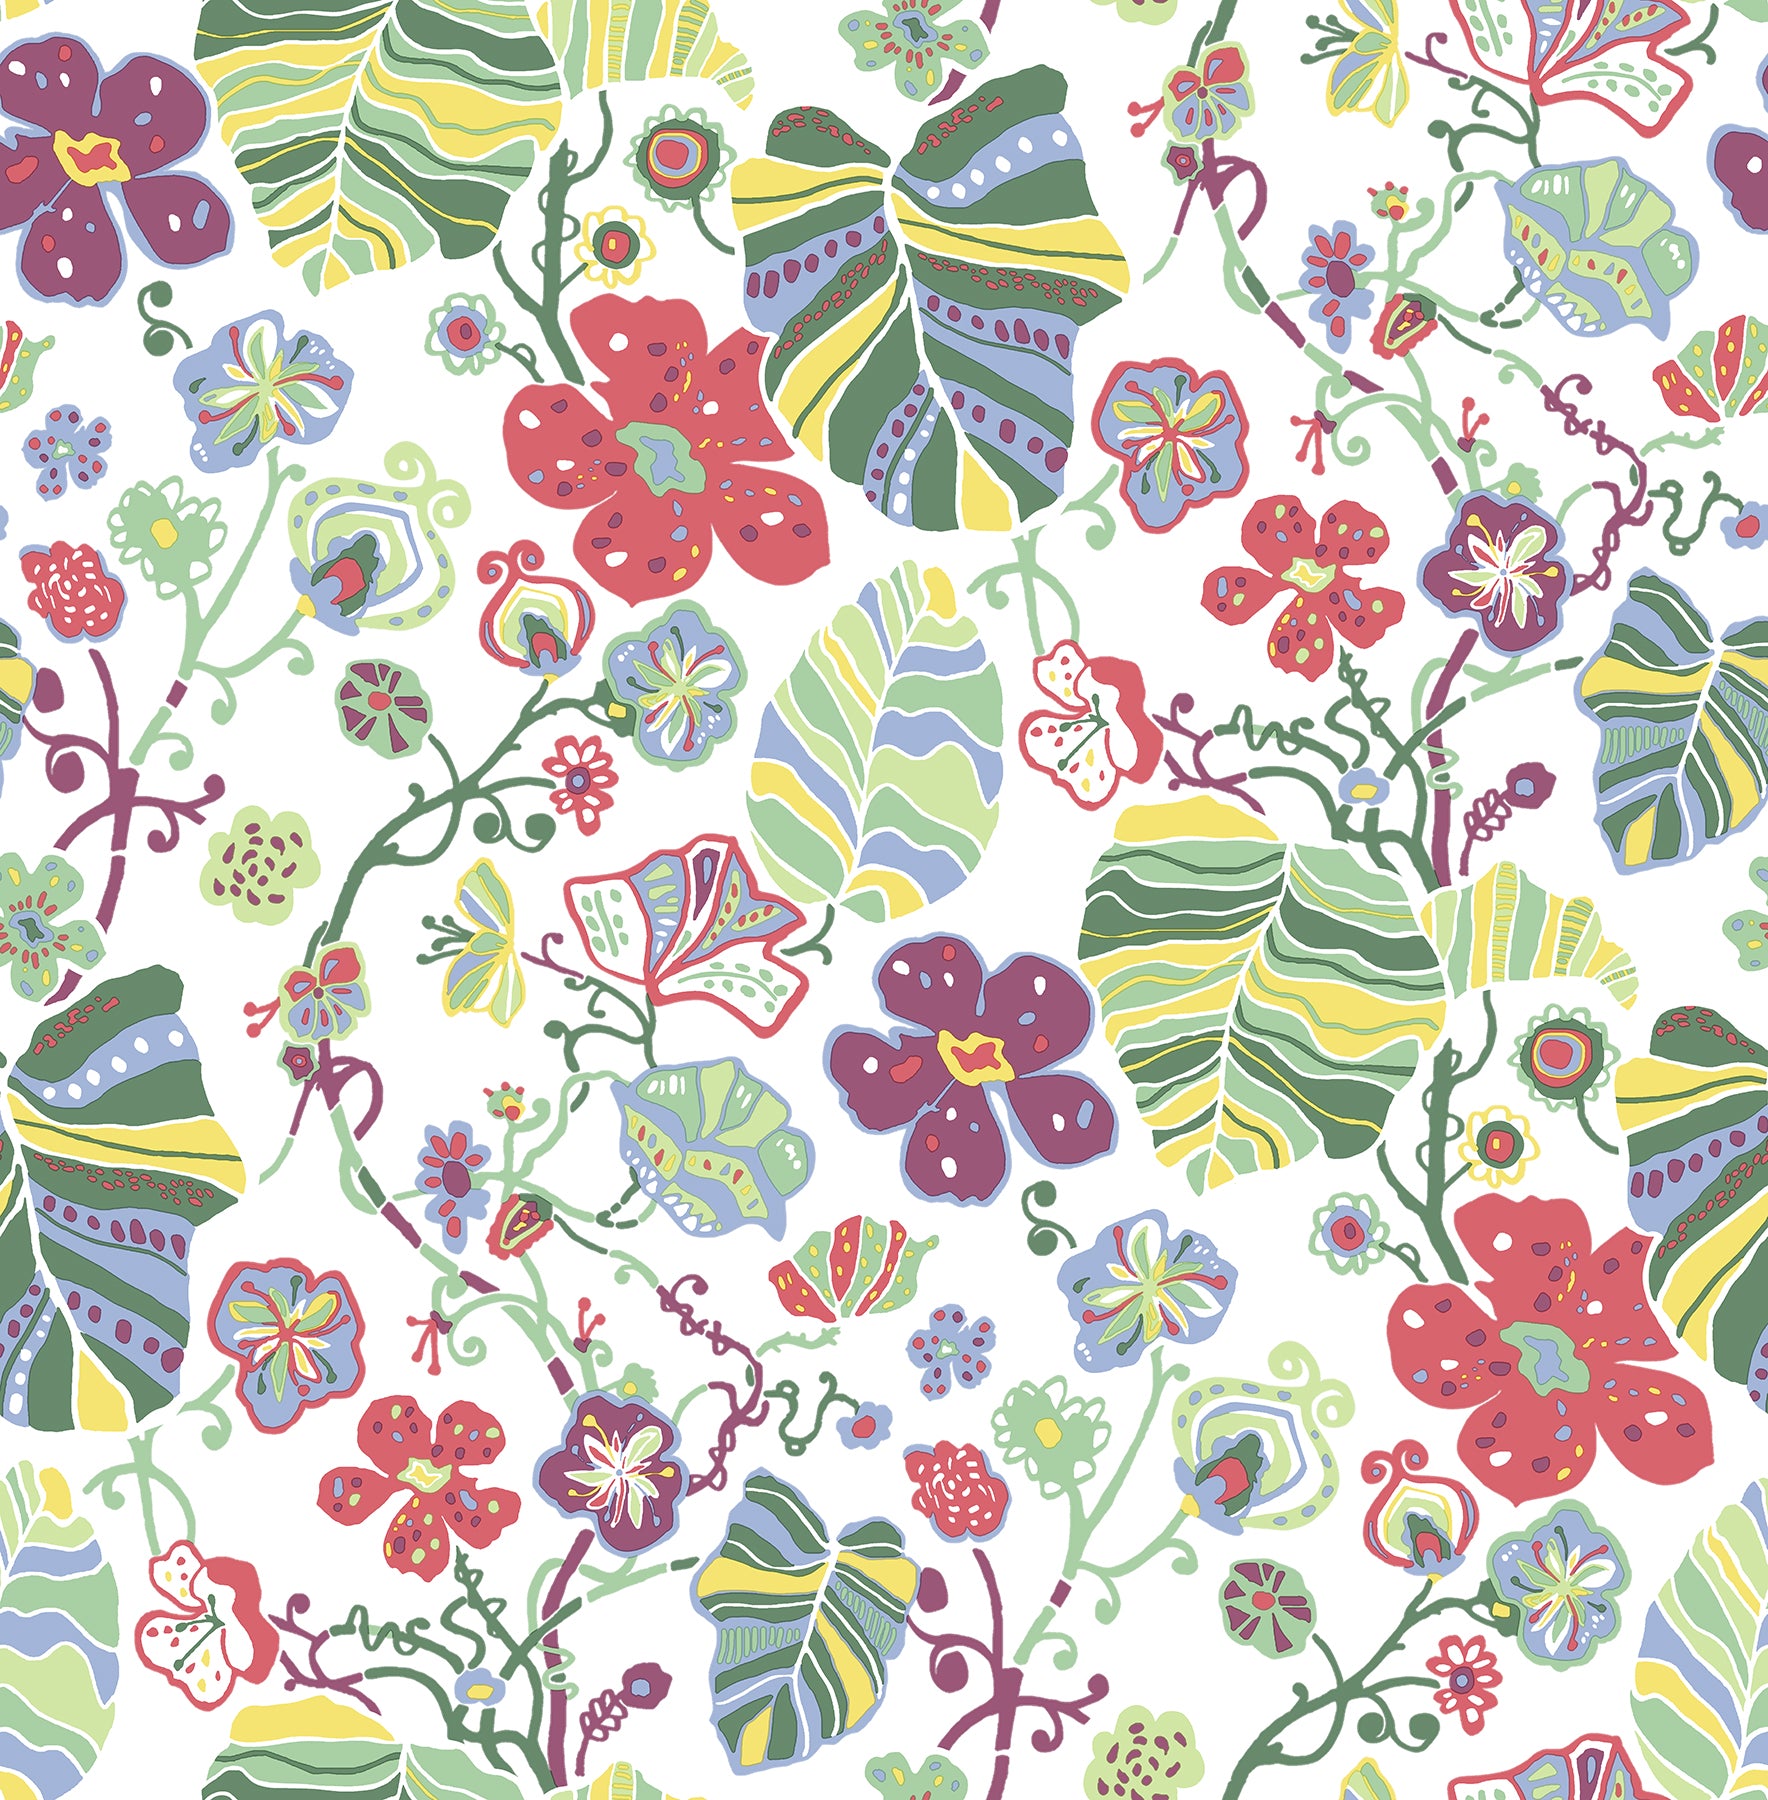 Save on 2903-25808 Blue Bell Gwyneth Multicolor Floral A Street Prints Wallpaper